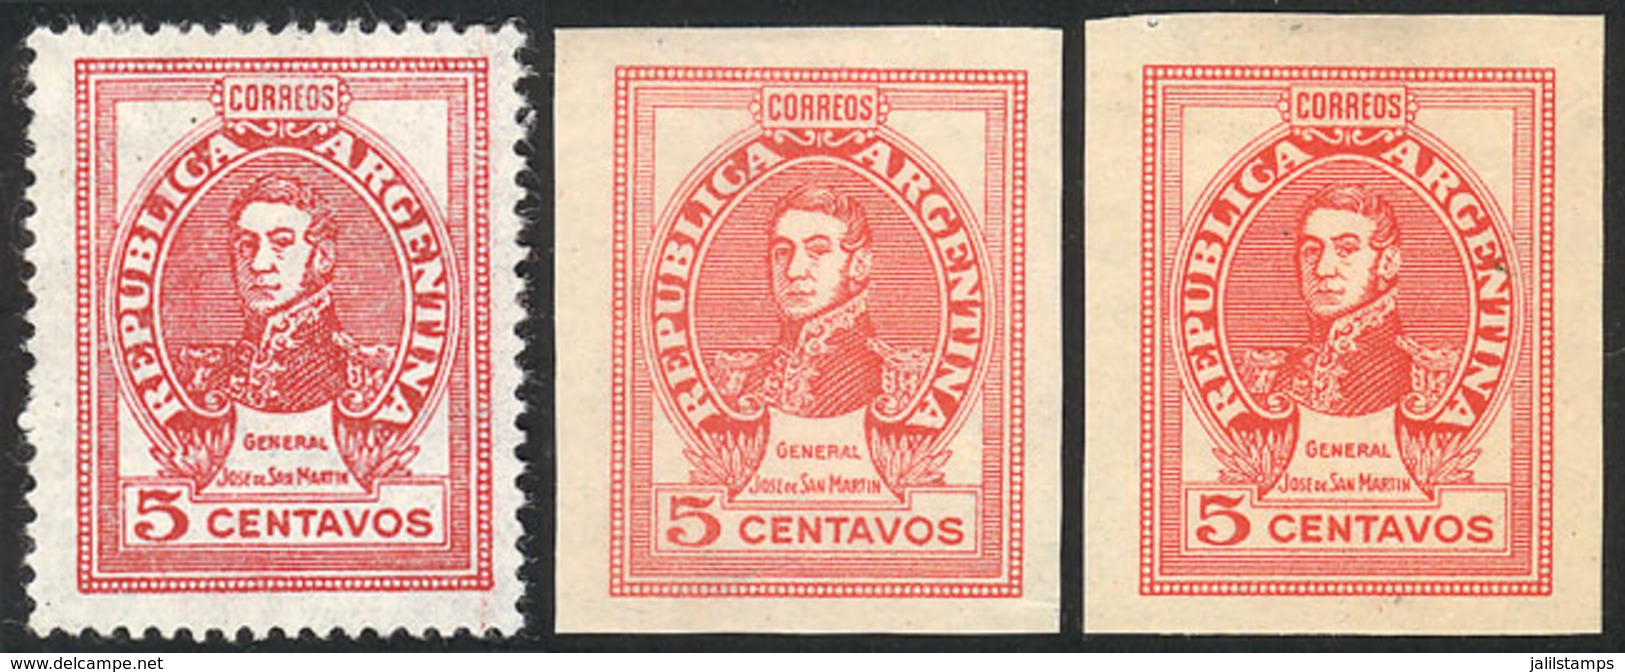 ARGENTINA: GJ.871, 1942/52 5c. San Martín, 3 Different TRIAL COLOR PROOFS, One Perforated And Printed On Thin Opaque Pap - Ongebruikt